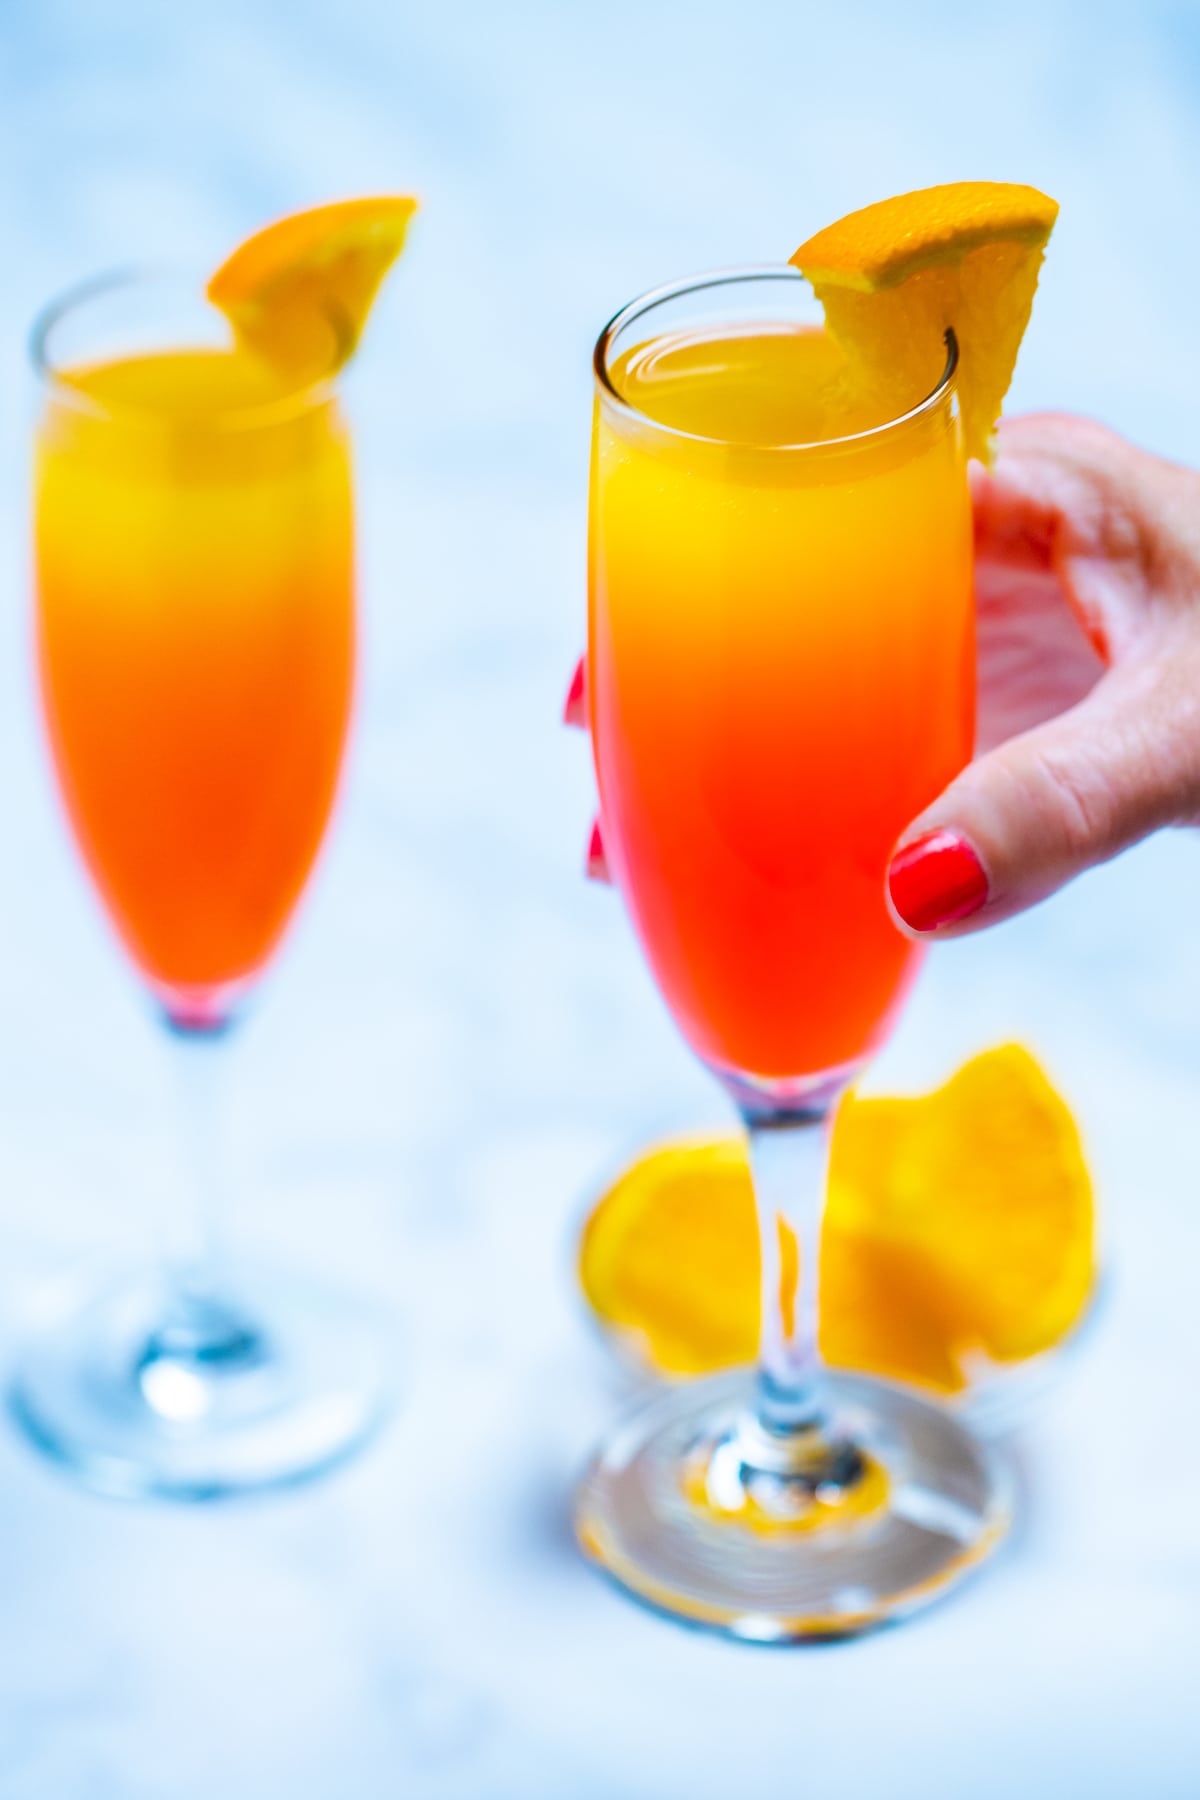 Two wine flutes with prosecco mimosas garnished with orange slices, one being held by a hand, with a small glass bowl of oranges on the table next to them.